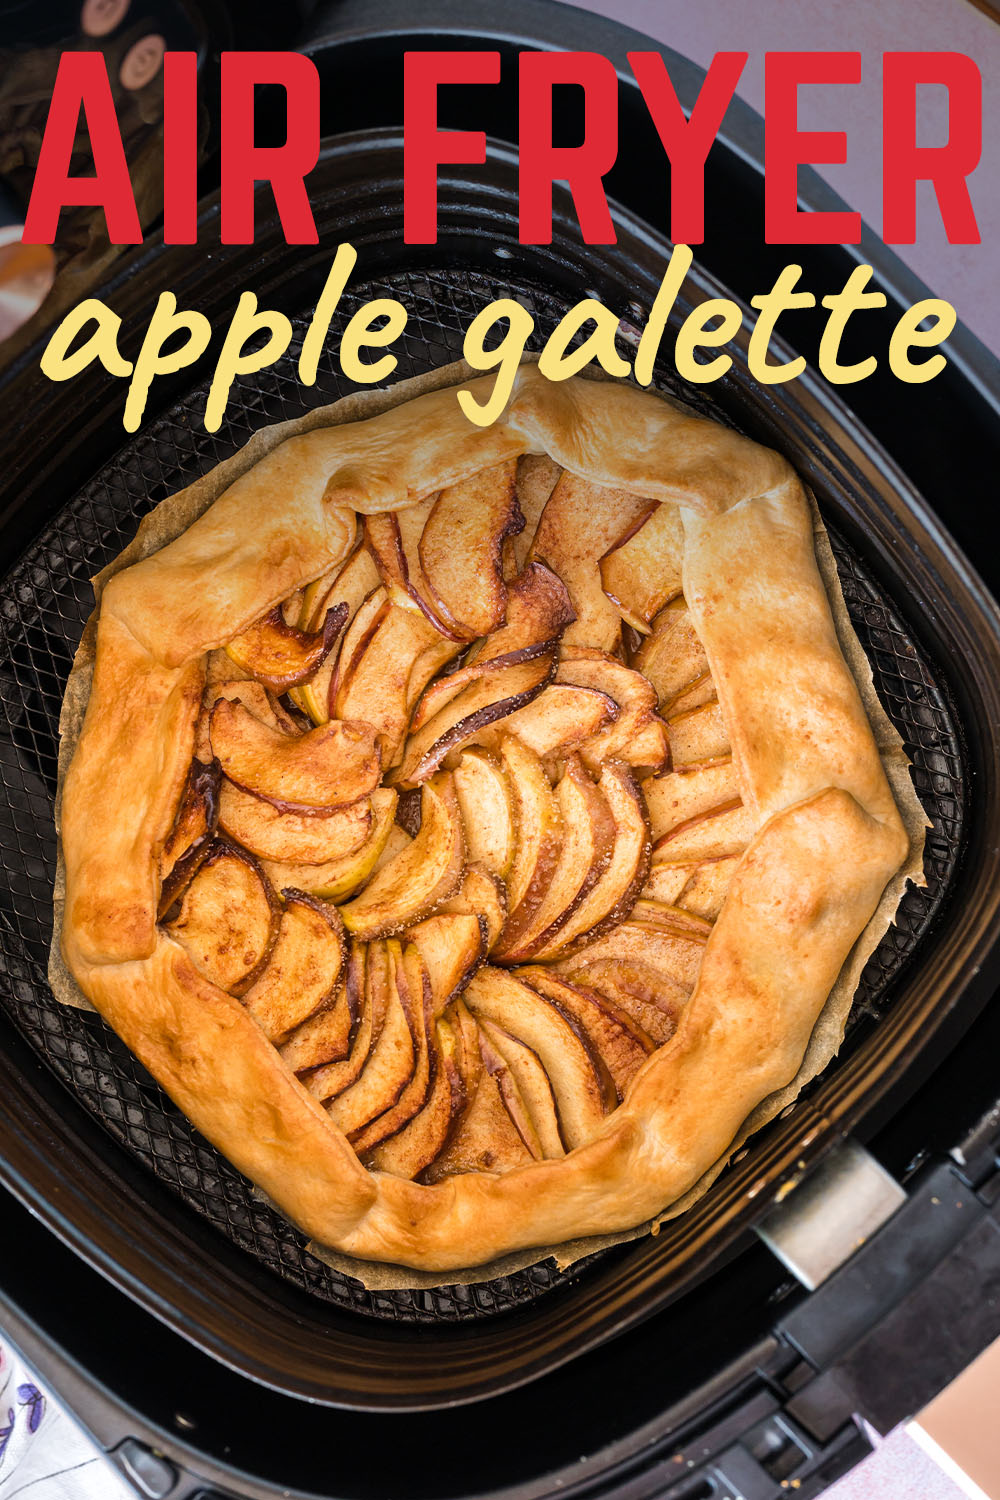 This apple galette always impresses my friends for both its taste and appearance.  It is super easy to make, but offers a unique dessert look!